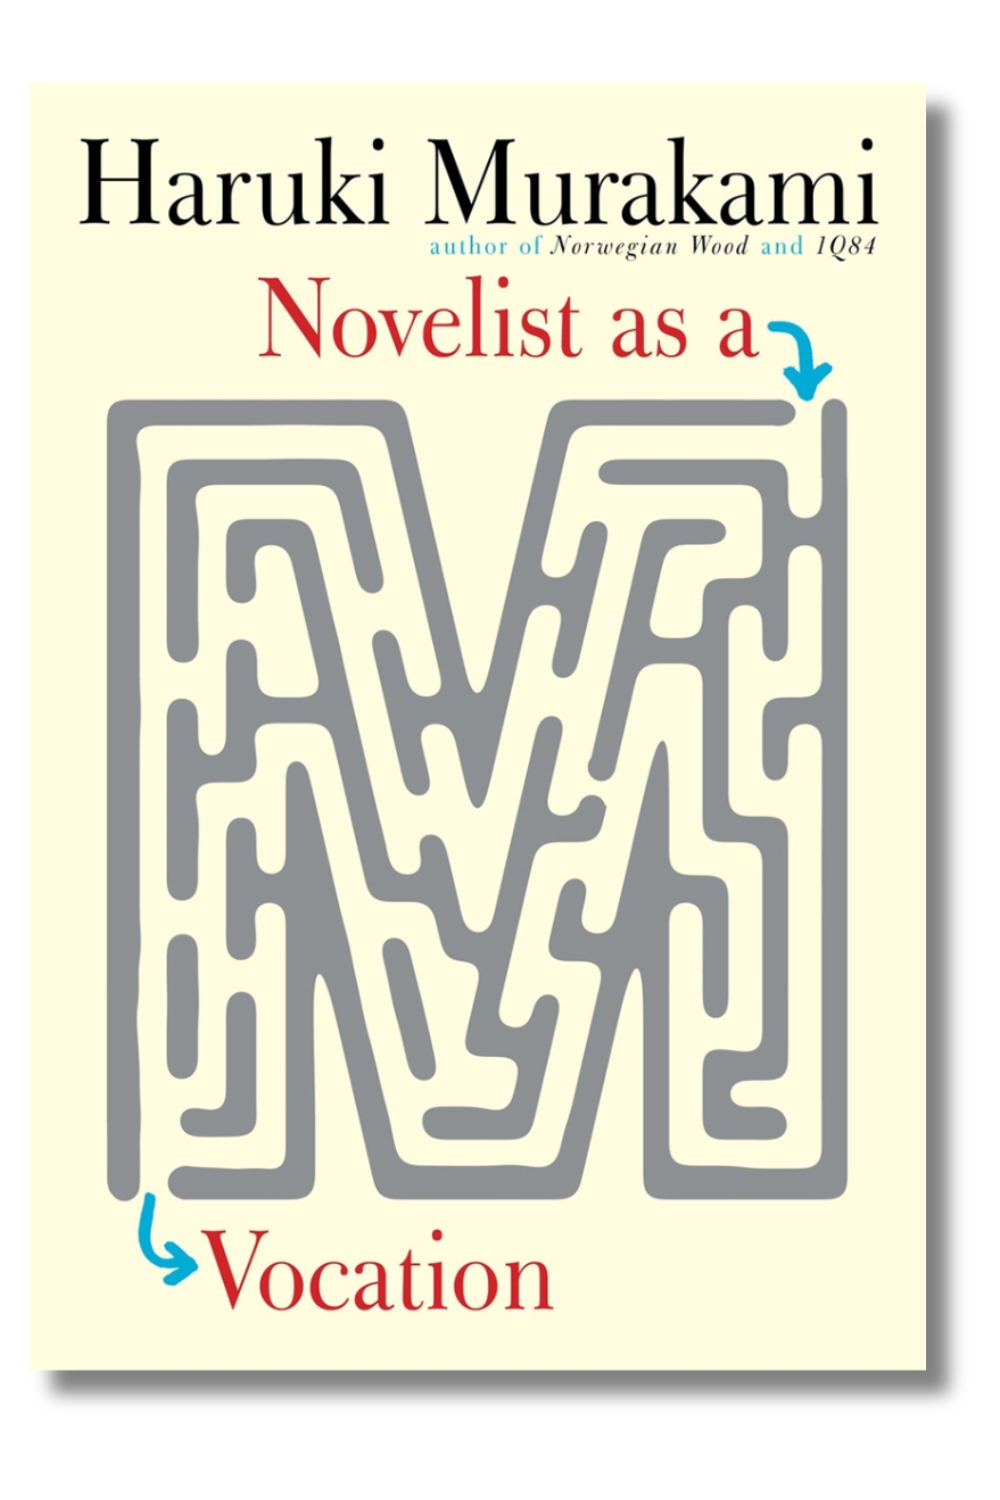 The cover of "Novelist as a Vocation" by Haruki Murakami, tr. by Philip Gabriel and Ted Goossen